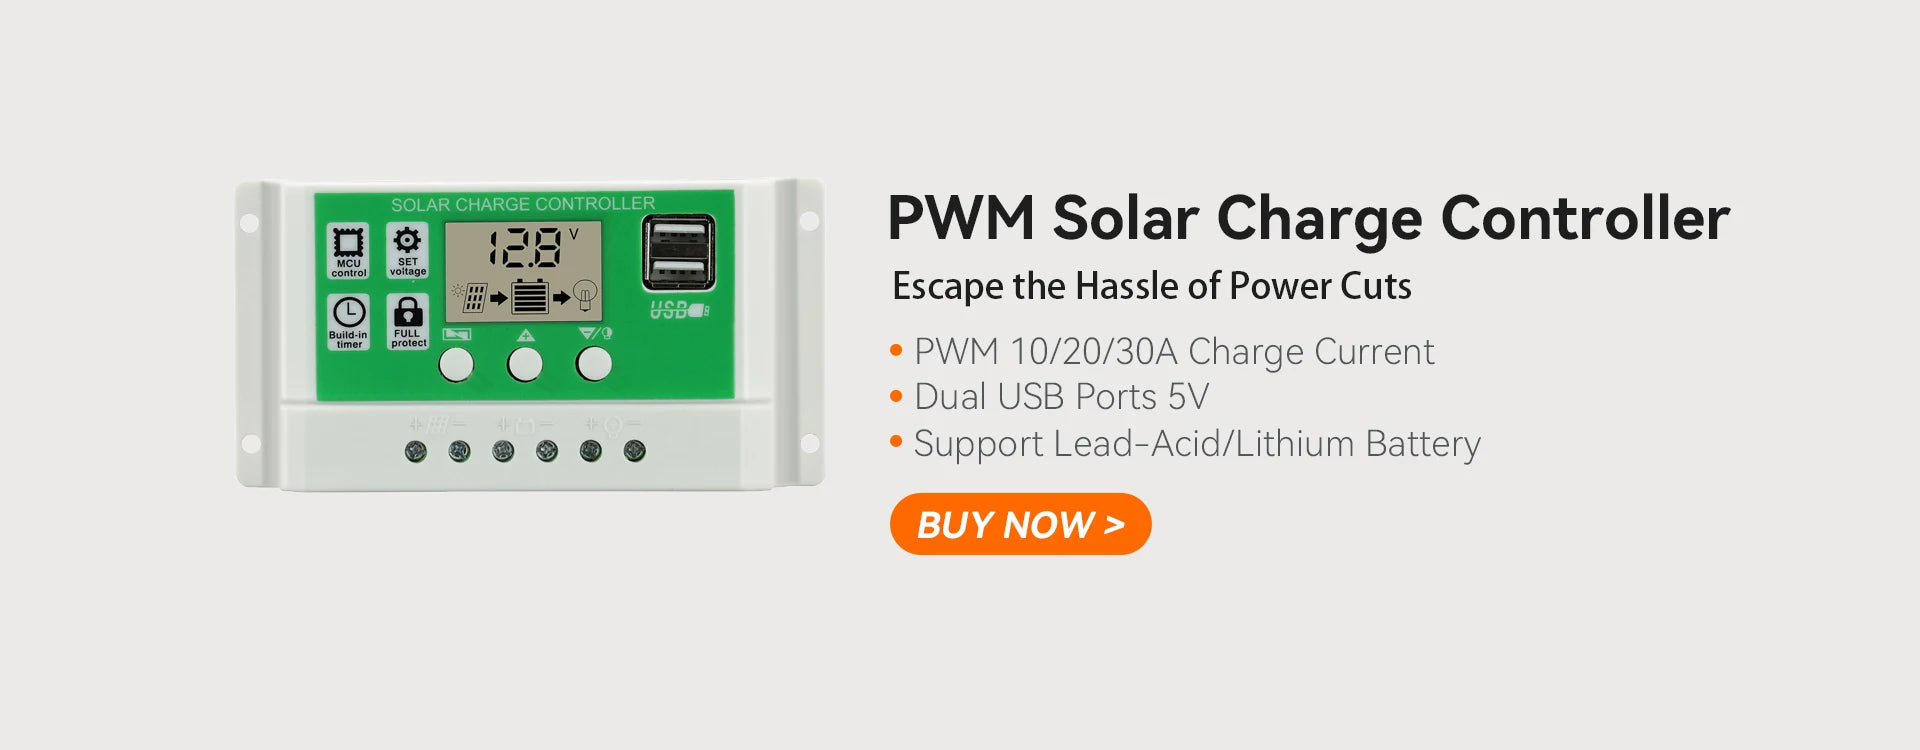 Reliable solar charger controller with MCU control, PWM tech, and overcharge protection for 10A, 20A, or 30A charging.